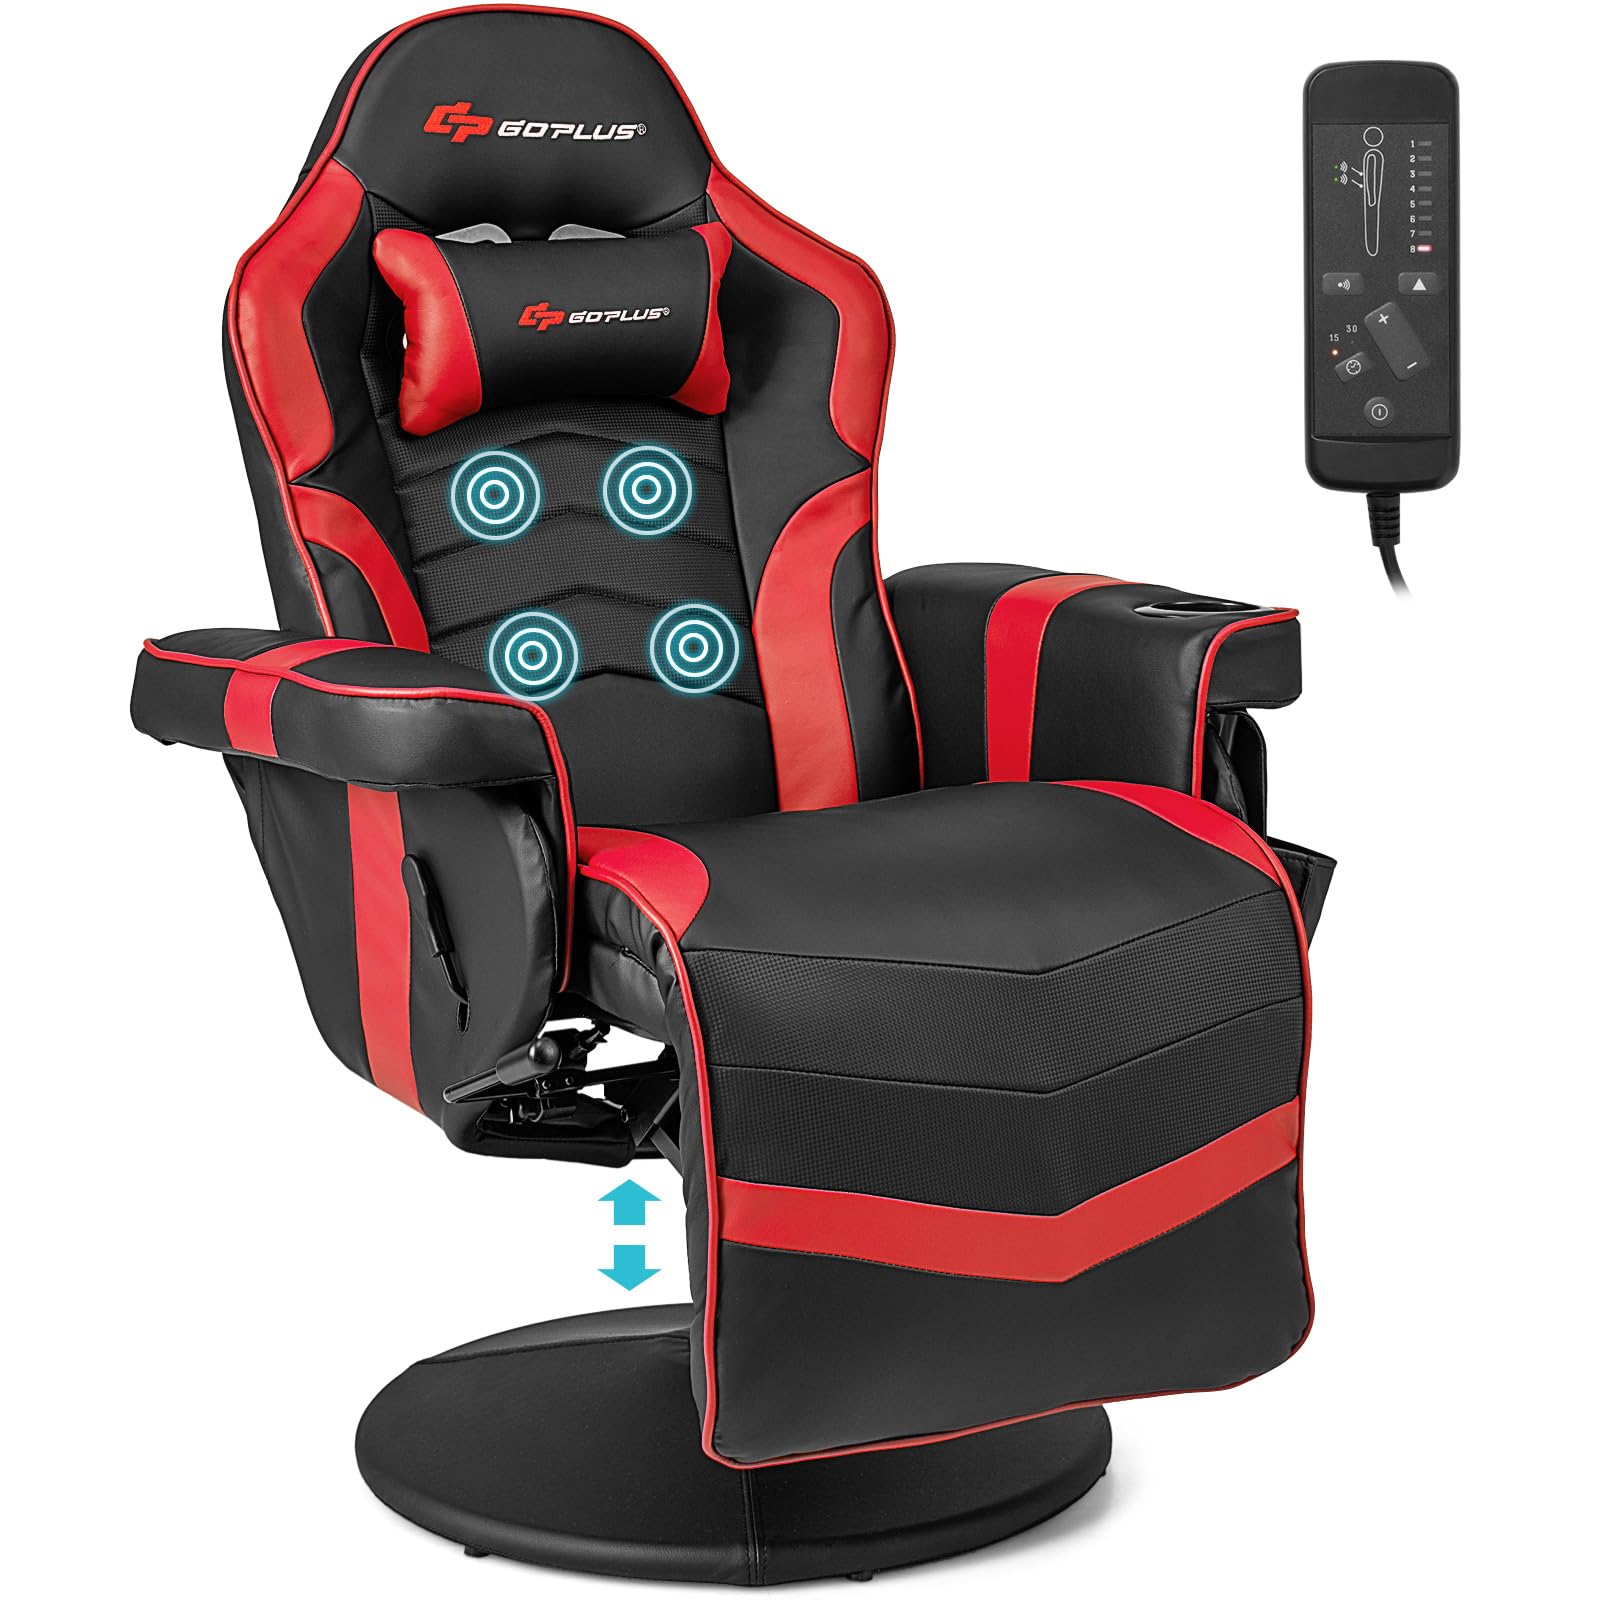 Goplus Gaming Chair, Height Adjustable Massage Video Game Chair with Retractable Footrest